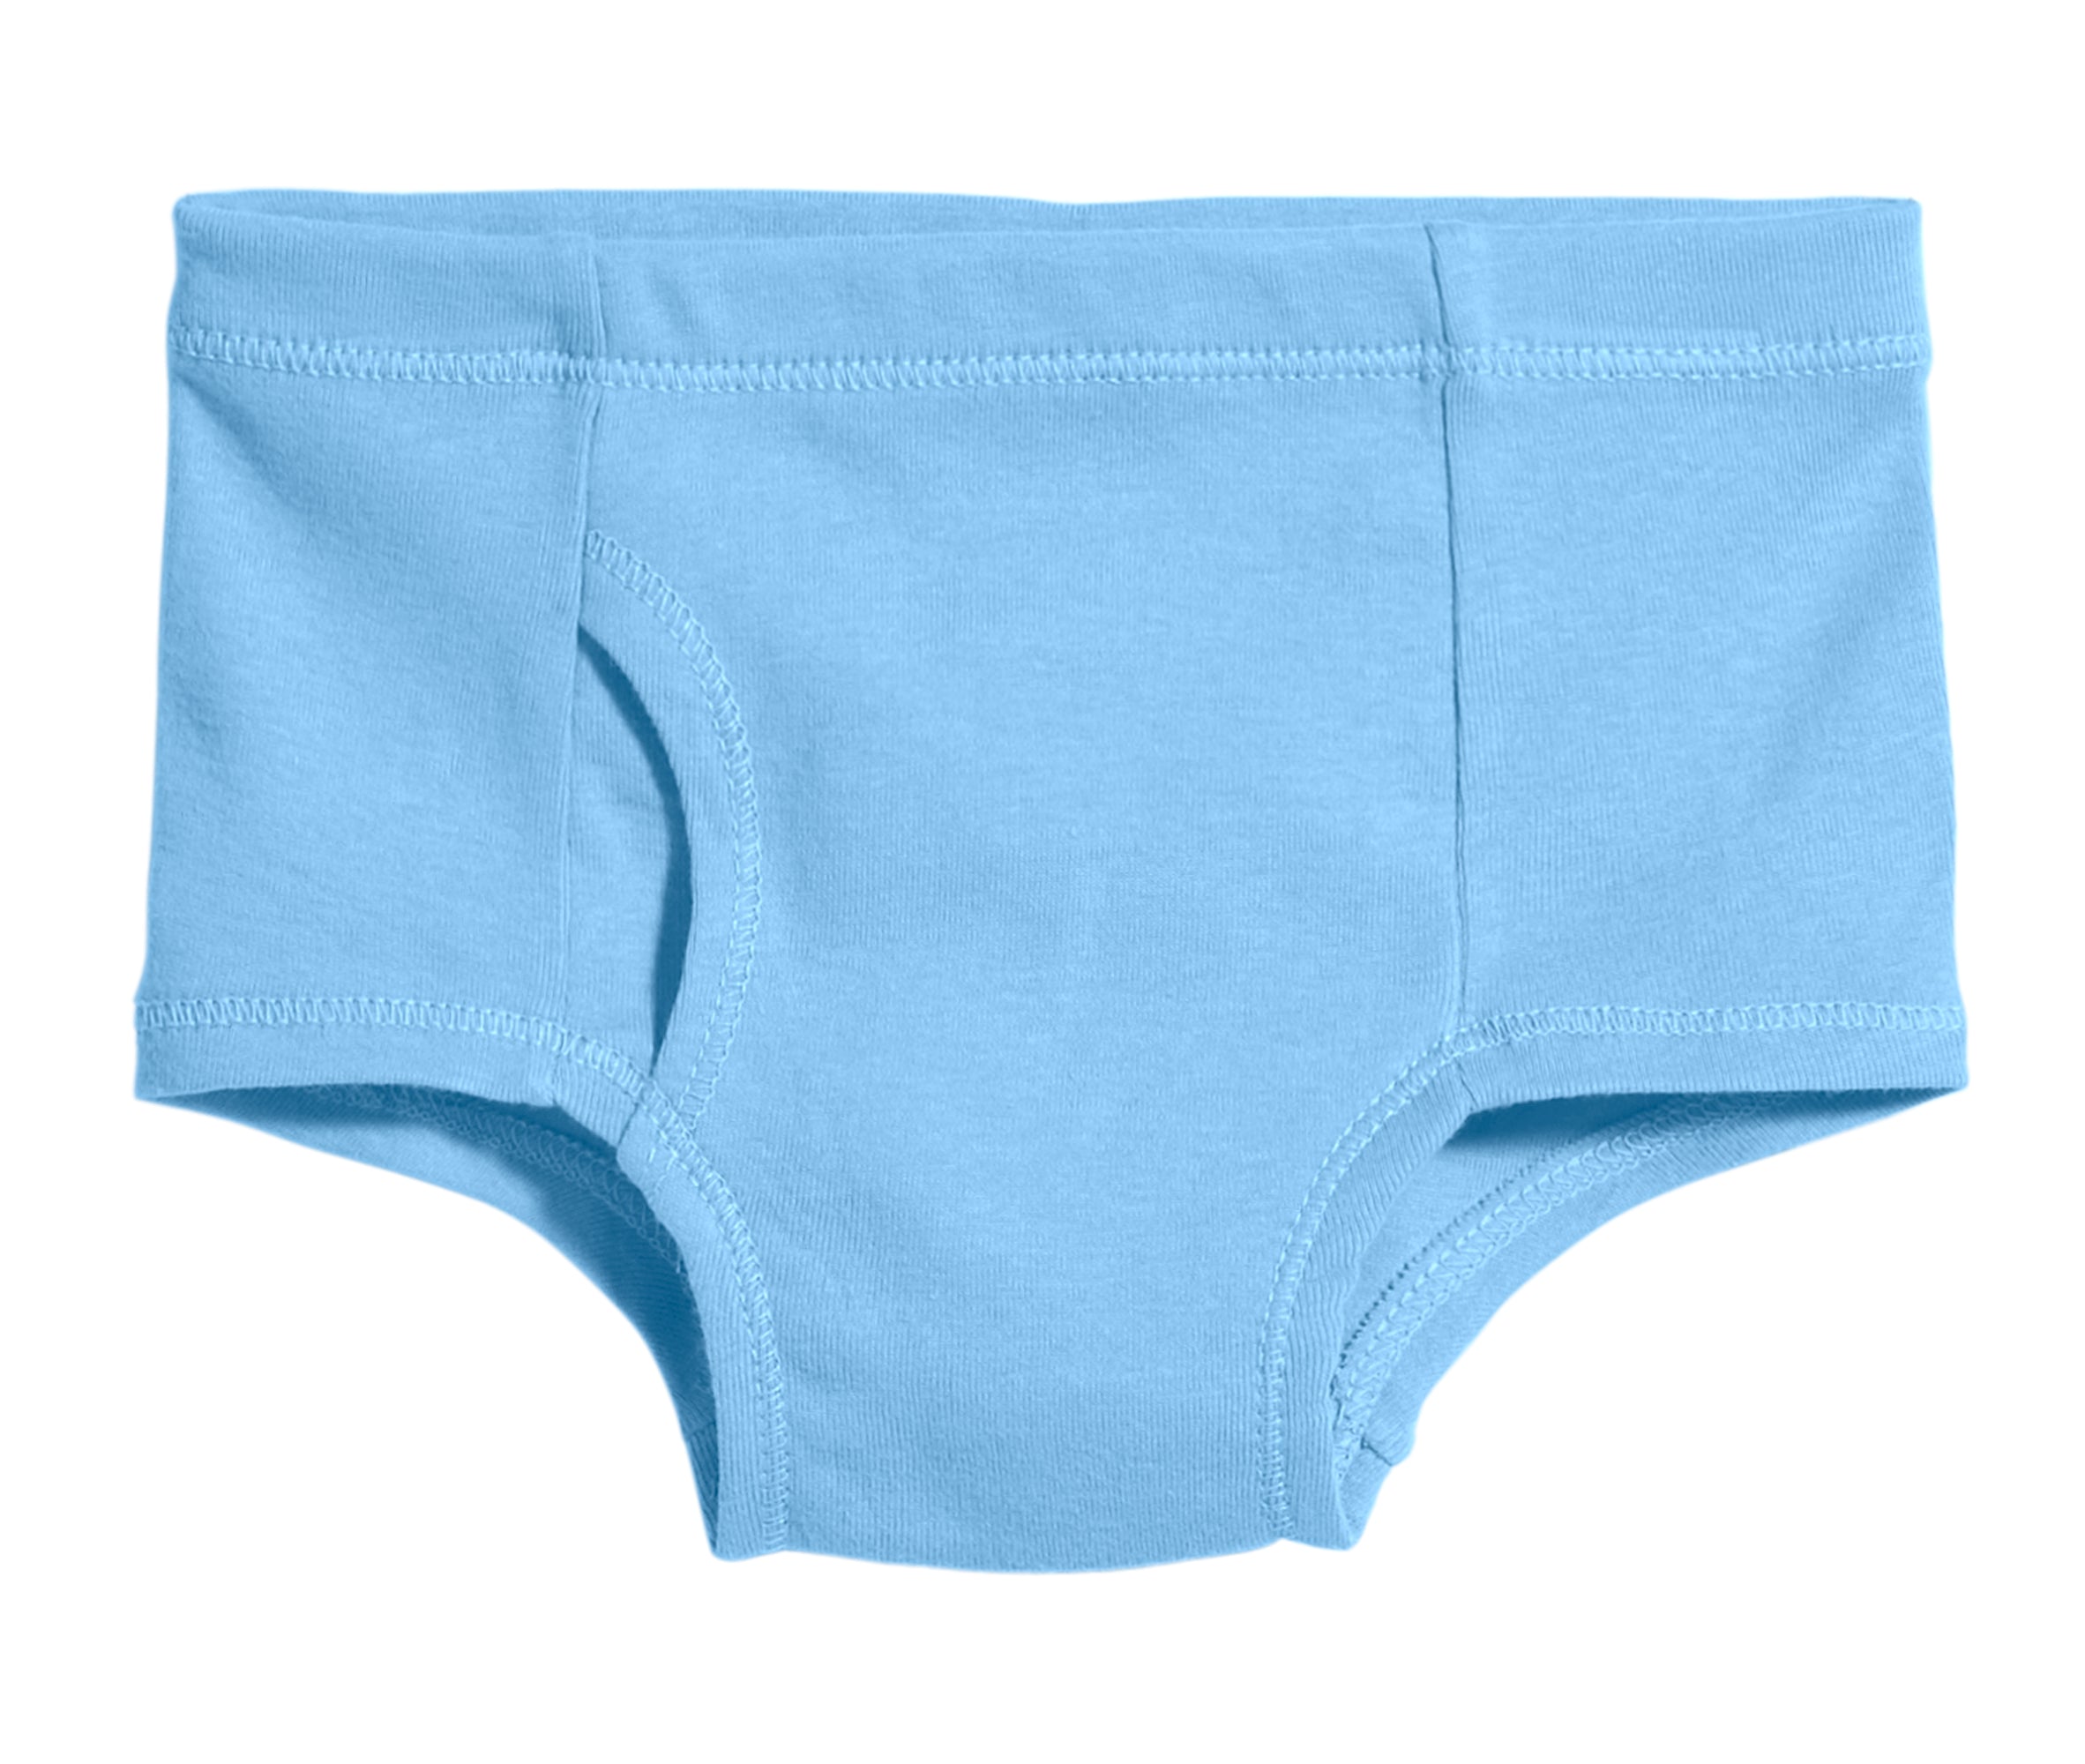 Buy GO SMART Underwear for Men 100% Combed Cotton Pack of 5 Blue